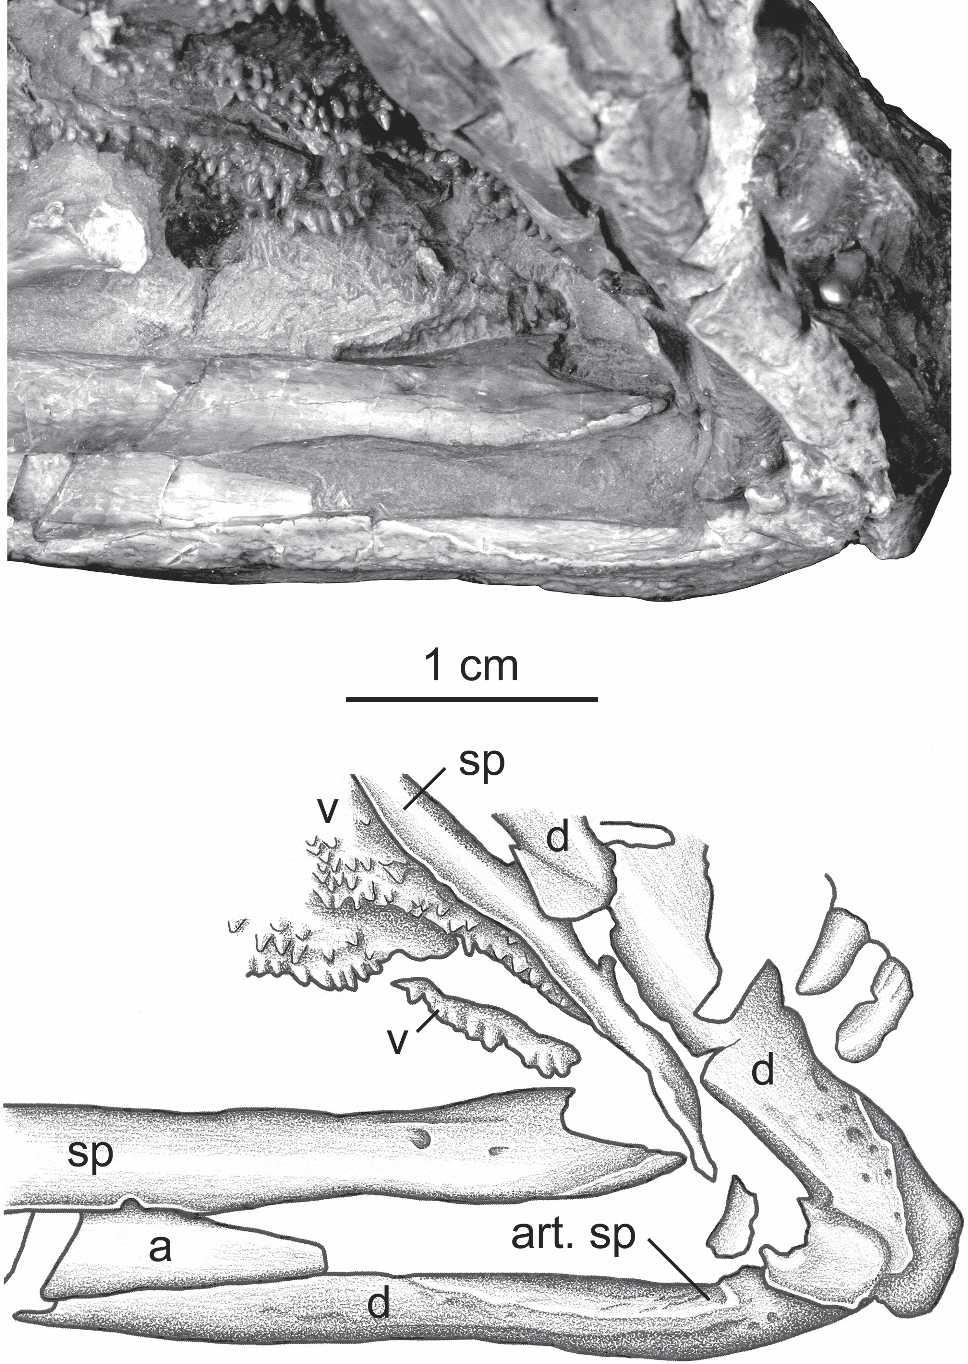 858 JOURNAL OF VERTEBRATE PALEONTOLOGY, VOL. 26, NO. 4, 2006 exoccipitals have both a medial and a lateral projection, of which the medial is more extensive.